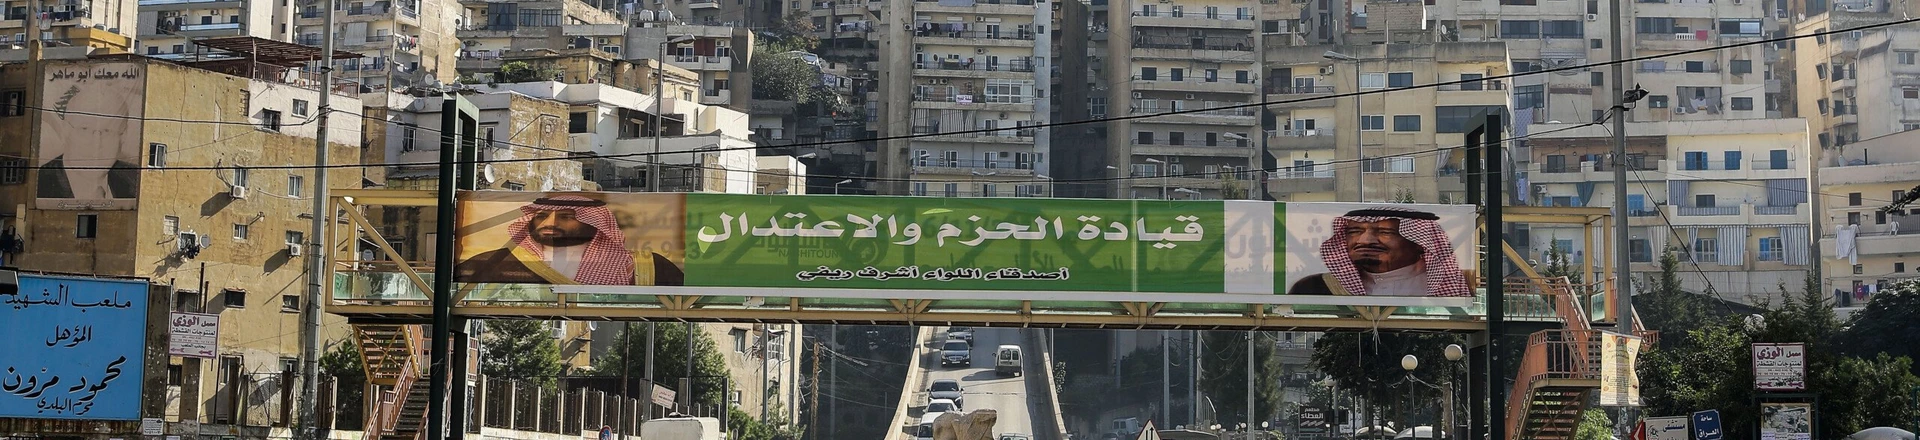 A picture taken on November 10, 2017 shows a banner bearing the images of Saudi King Salman bin Abdulaziz (R) and Crown Prince Mohammed bin Salman (L) hanging on a pedestrian crossing bridge in the northern Lebanese port city of Tripoli, between them a caption reading in Arabic "firm and moderating leadership", days after Lebanese Prime Minister Saad Hariri announced his resignation during a televised speech airing from the Saudi capital Riyadh.Hariri's announced resignation sparked concerns of a political crisis in Lebanon as tensions between Saudi Arabia and Iran escalated. / AFP PHOTO / JOSEPH EID (Photo credit should read JOSEPH EID/AFP/Getty Images)